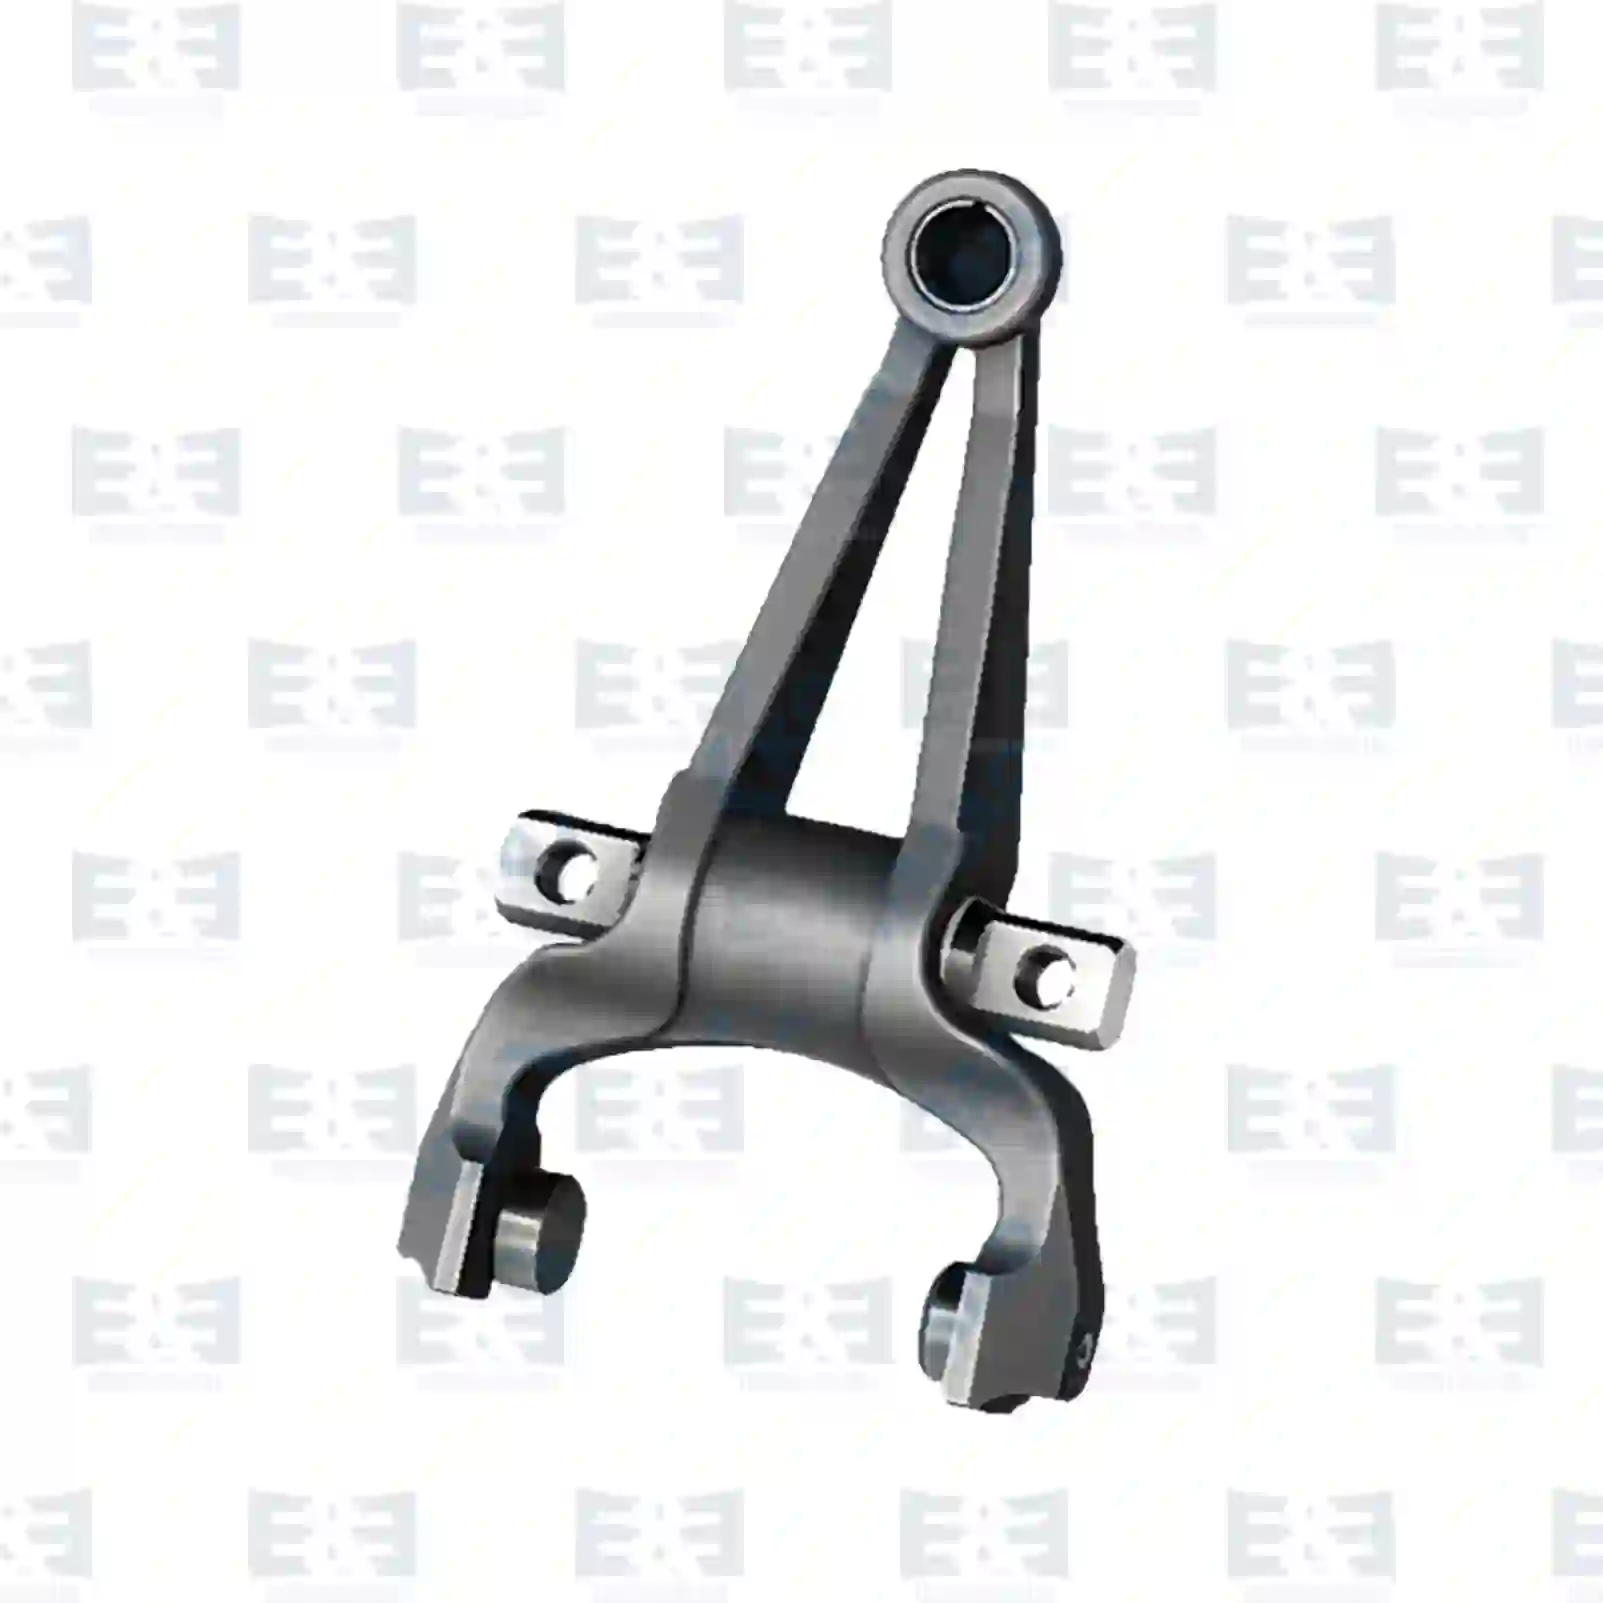 Release Lever Release fork, complete, EE No 2E2289195 ,  oem no:1615929, 1668287, 1686643, 1745237, 1788984, 1860299, 1896797, 1956924, 42558367, 42563674, 5001854041, 10873323, 571800008, 81305600067, 81305600068, 81305600078, 81305600079, 81305606023, 81305606024, 81324110009, 81930210424, N2930210137, 0002503513, 1615935, 7421624229, 7485129131, 85109290, ZG30361-0008 E&E Truck Spare Parts | Truck Spare Parts, Auotomotive Spare Parts